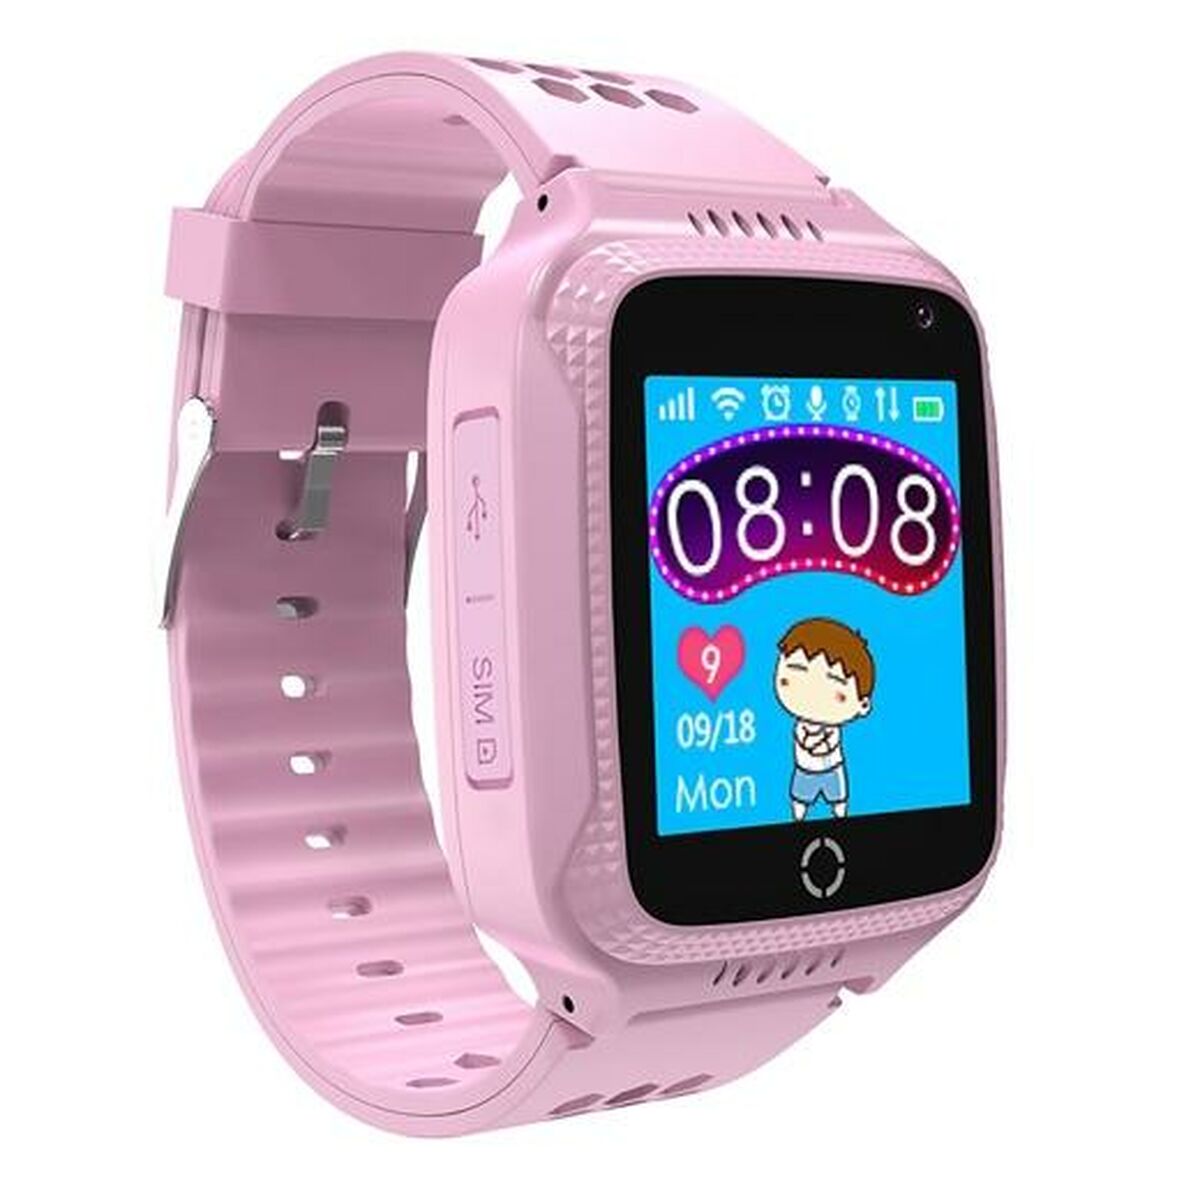 Smartwatch pour enfants Celly KIDSWATCH Rose 1,44"